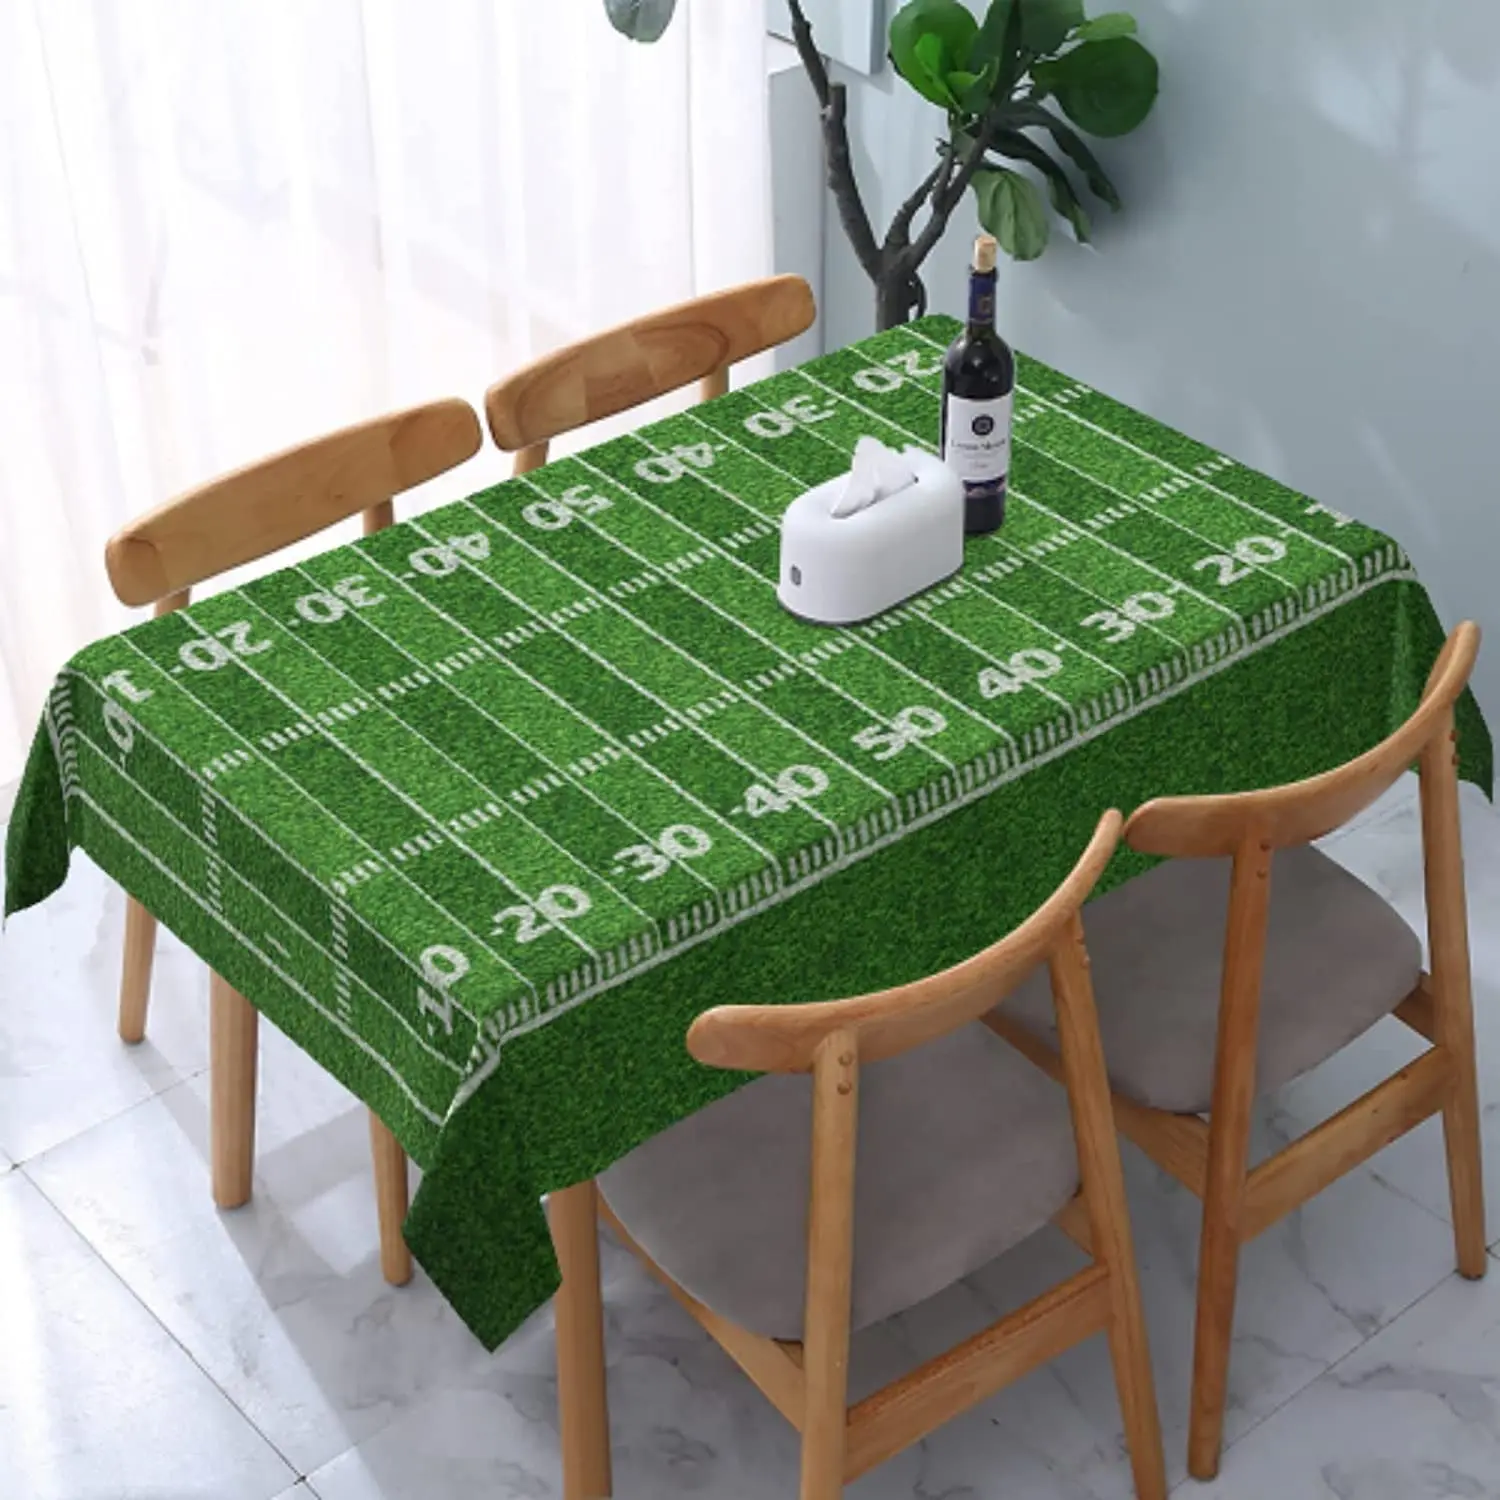 American Football Waterproof Tablecloth Soccer Field Rectangular Tablecloth Family Party Dinner Tablecloth Outdoor Picnic Mat